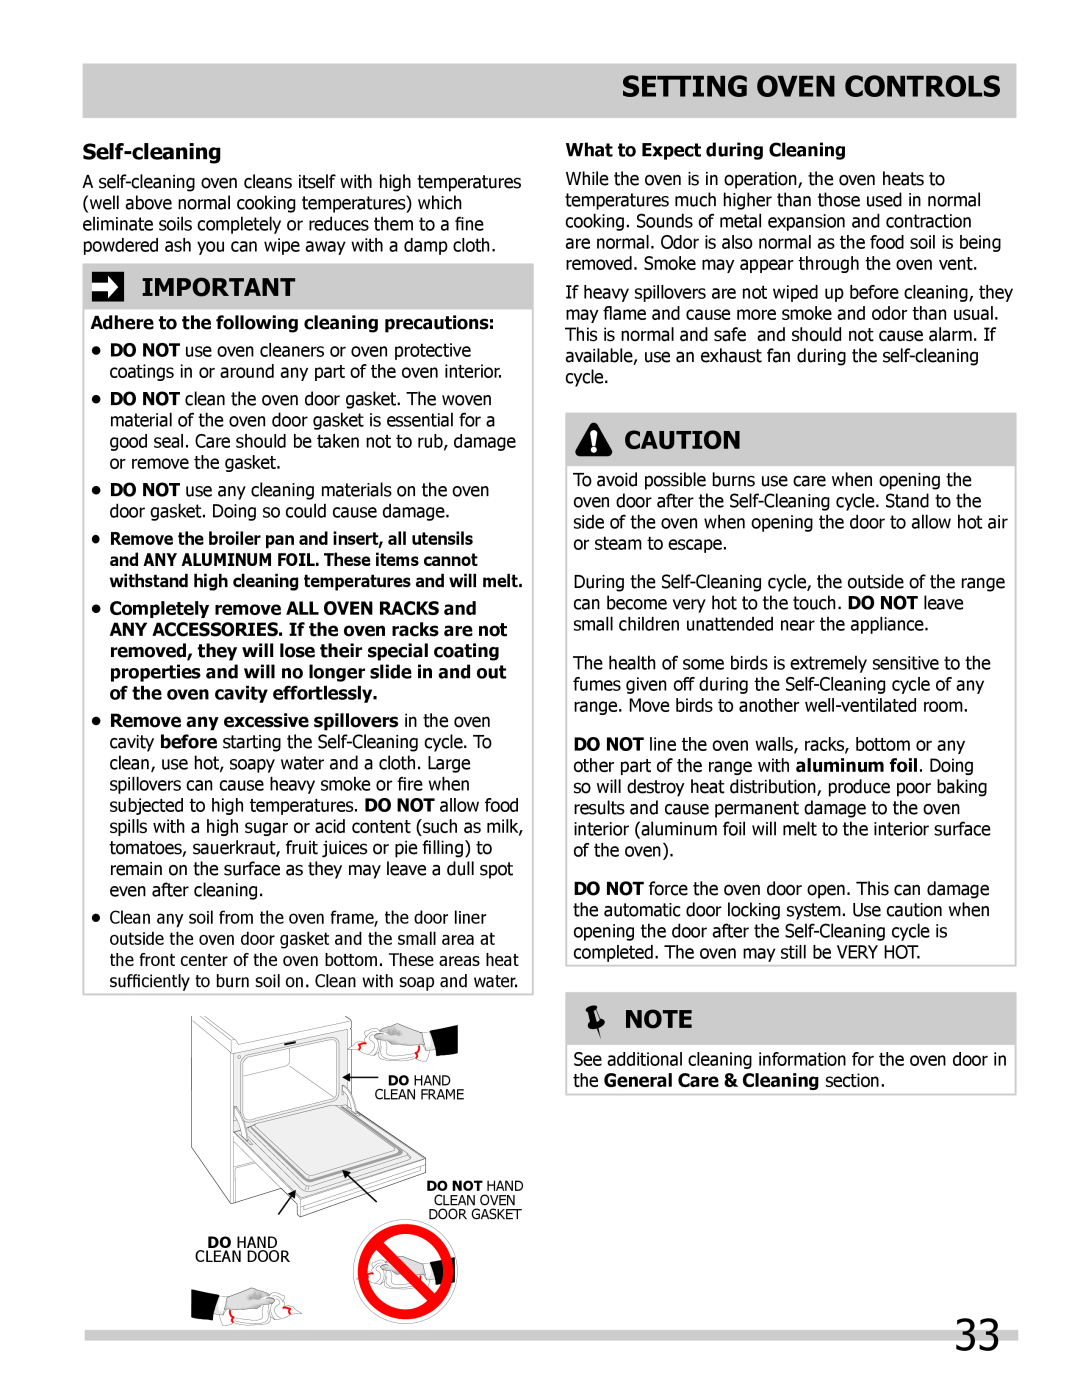 Frigidaire 318205804 Self-cleaning, Adhere to the following cleaning precautions, What to Expect during Cleaning,  Note 